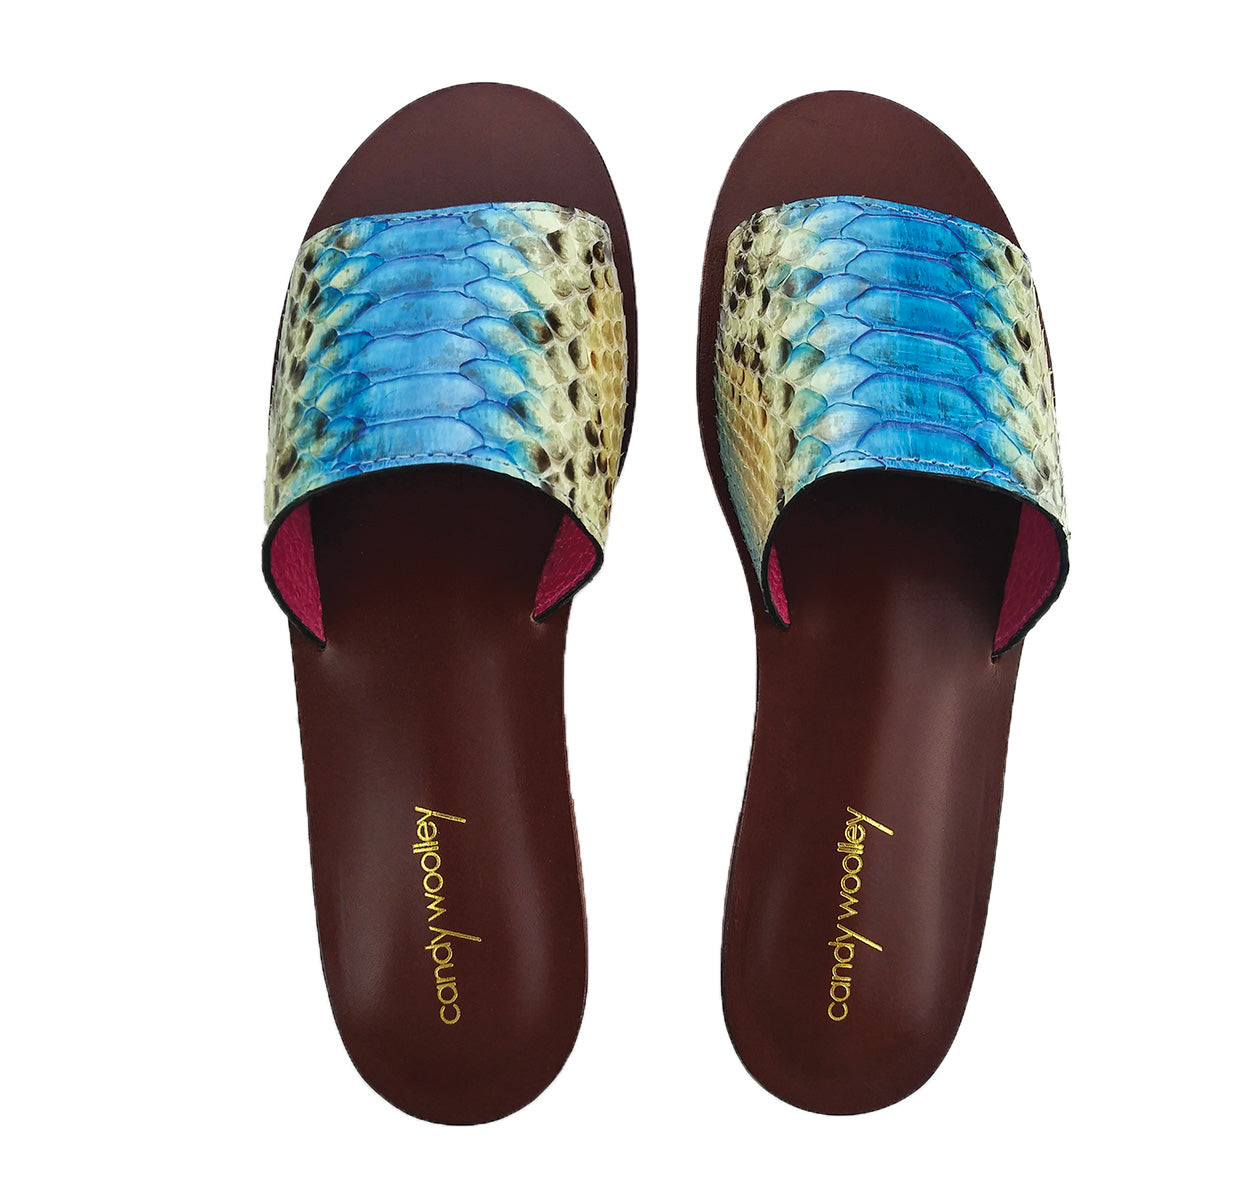 Genuine Python Cyan & Dusty Blush Flat Slide Sandals. Size Available 9. [NEW: NON-SLIP & SOLE PROTECTOR]